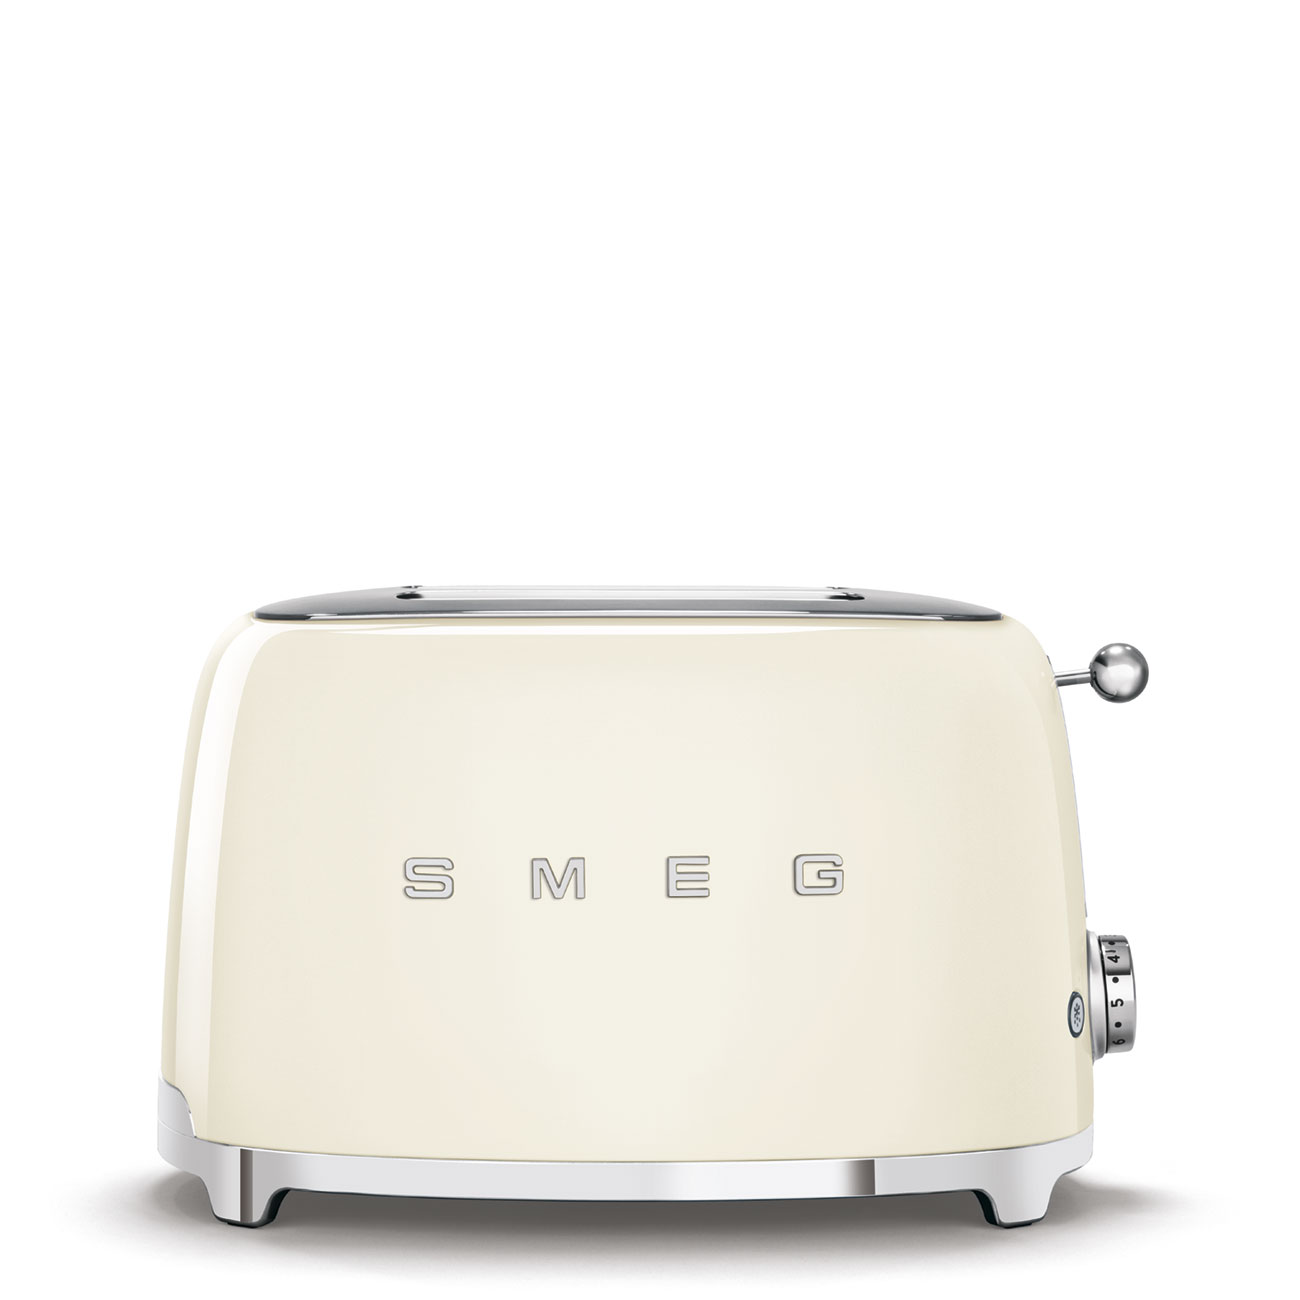 SMEG Silver & White Electric Kettle By ROXANA FRONTINI Series LOVE SW –  Roxana Frontini®